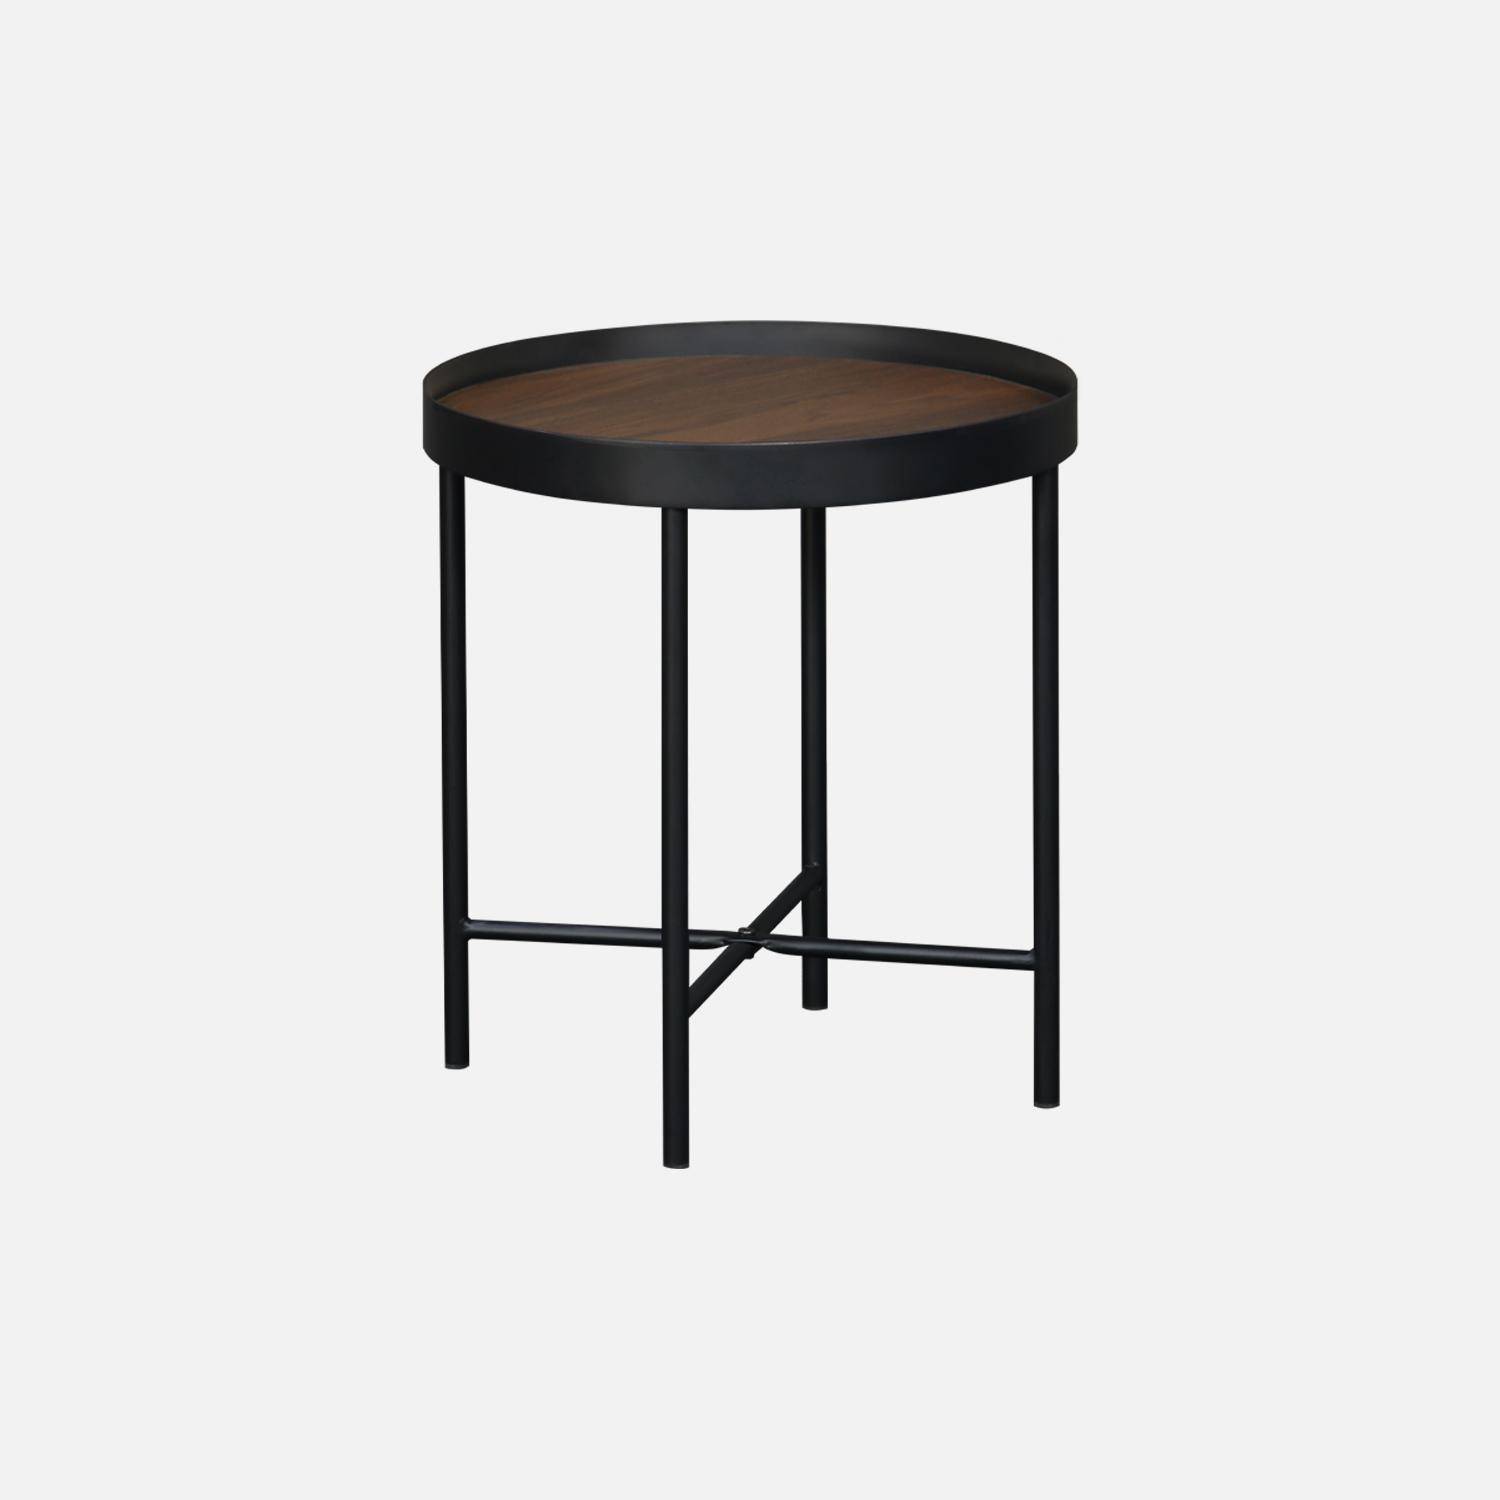 Set of 2 practical round nesting tables in walnut-effect MDF with black legs Photo6